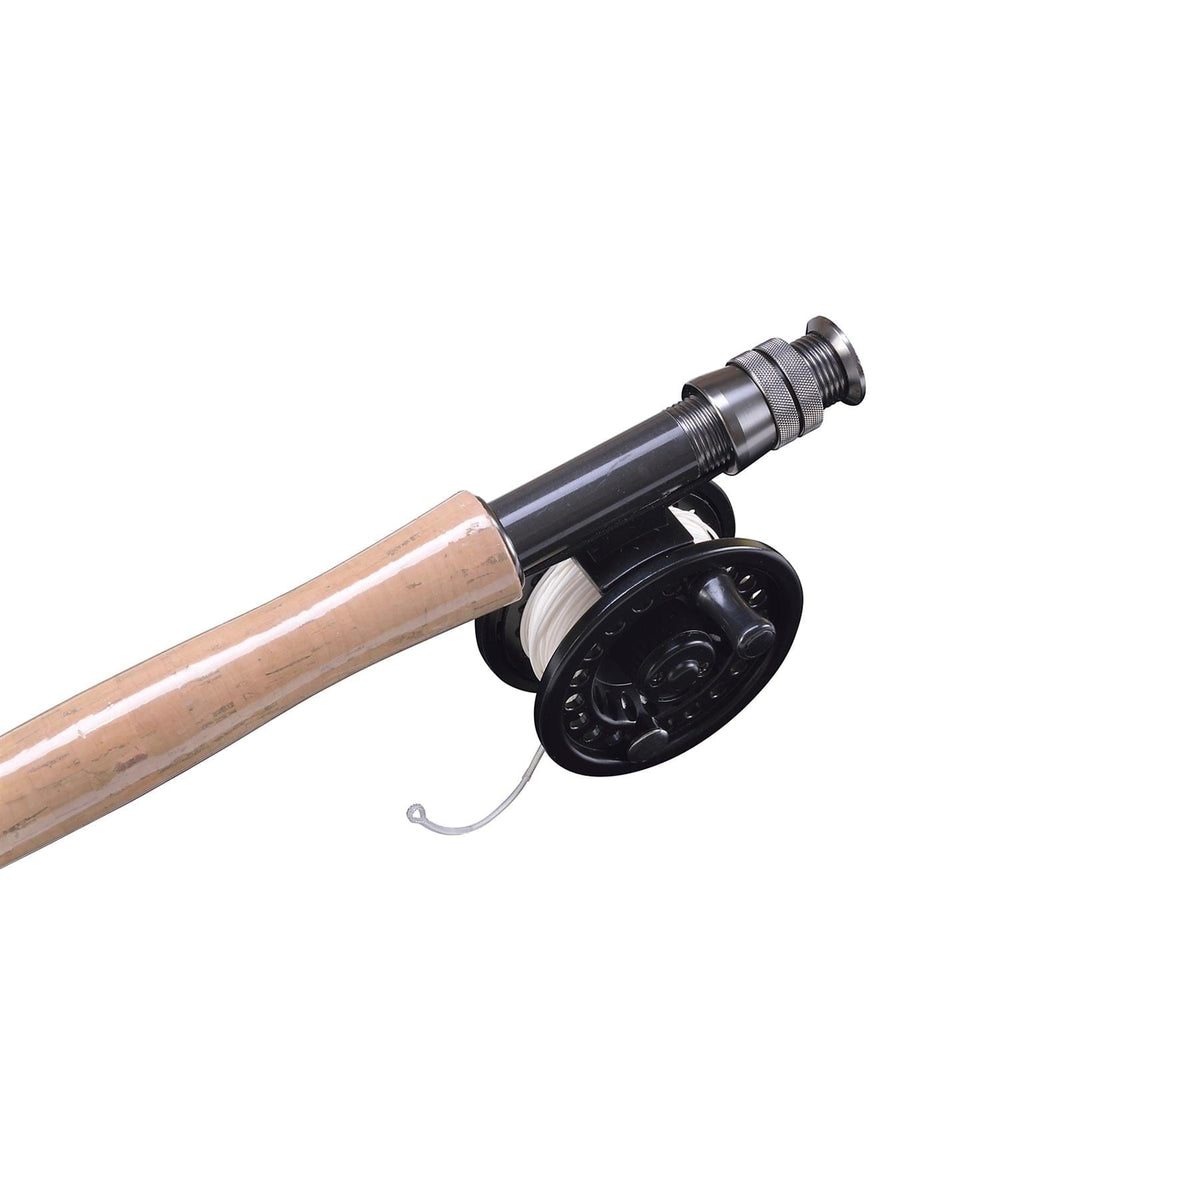 Shakespeare Sigma 9FT 5WT 4PC Fly Rod and Reel Combo (incl Line Loaded)